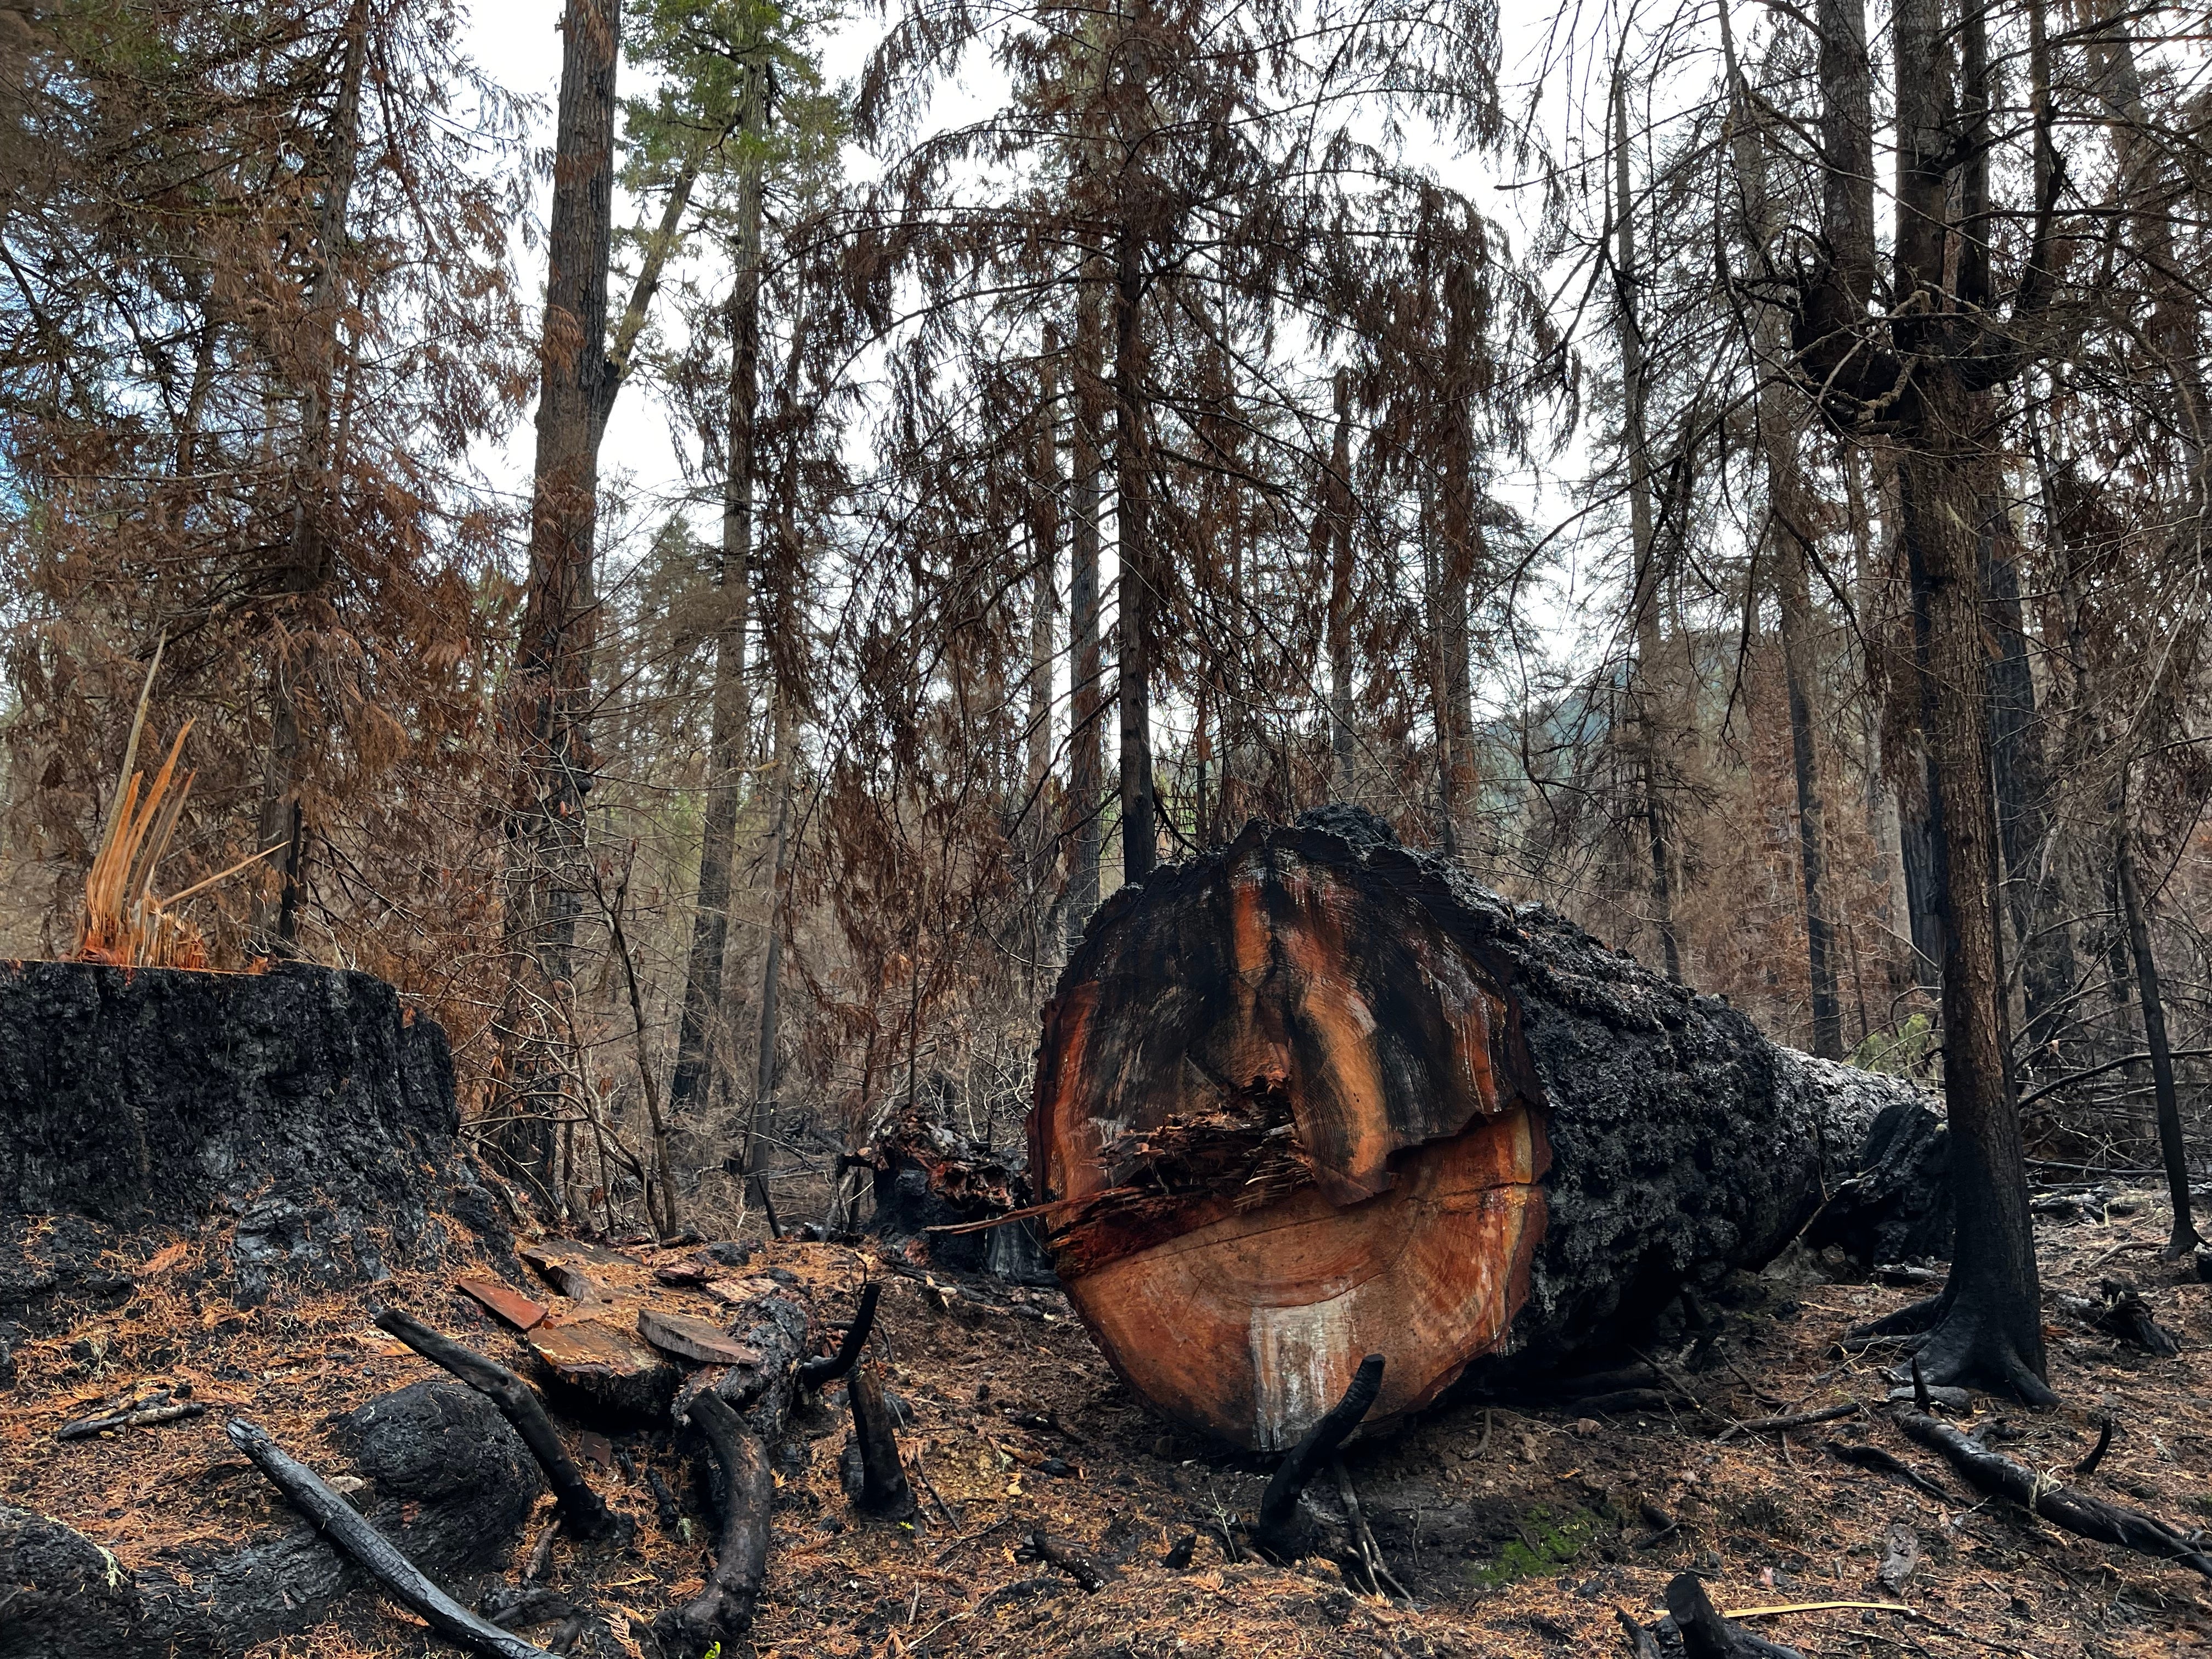 The cut end of a felled tree shows burn marks extending from the bark to inner rings.